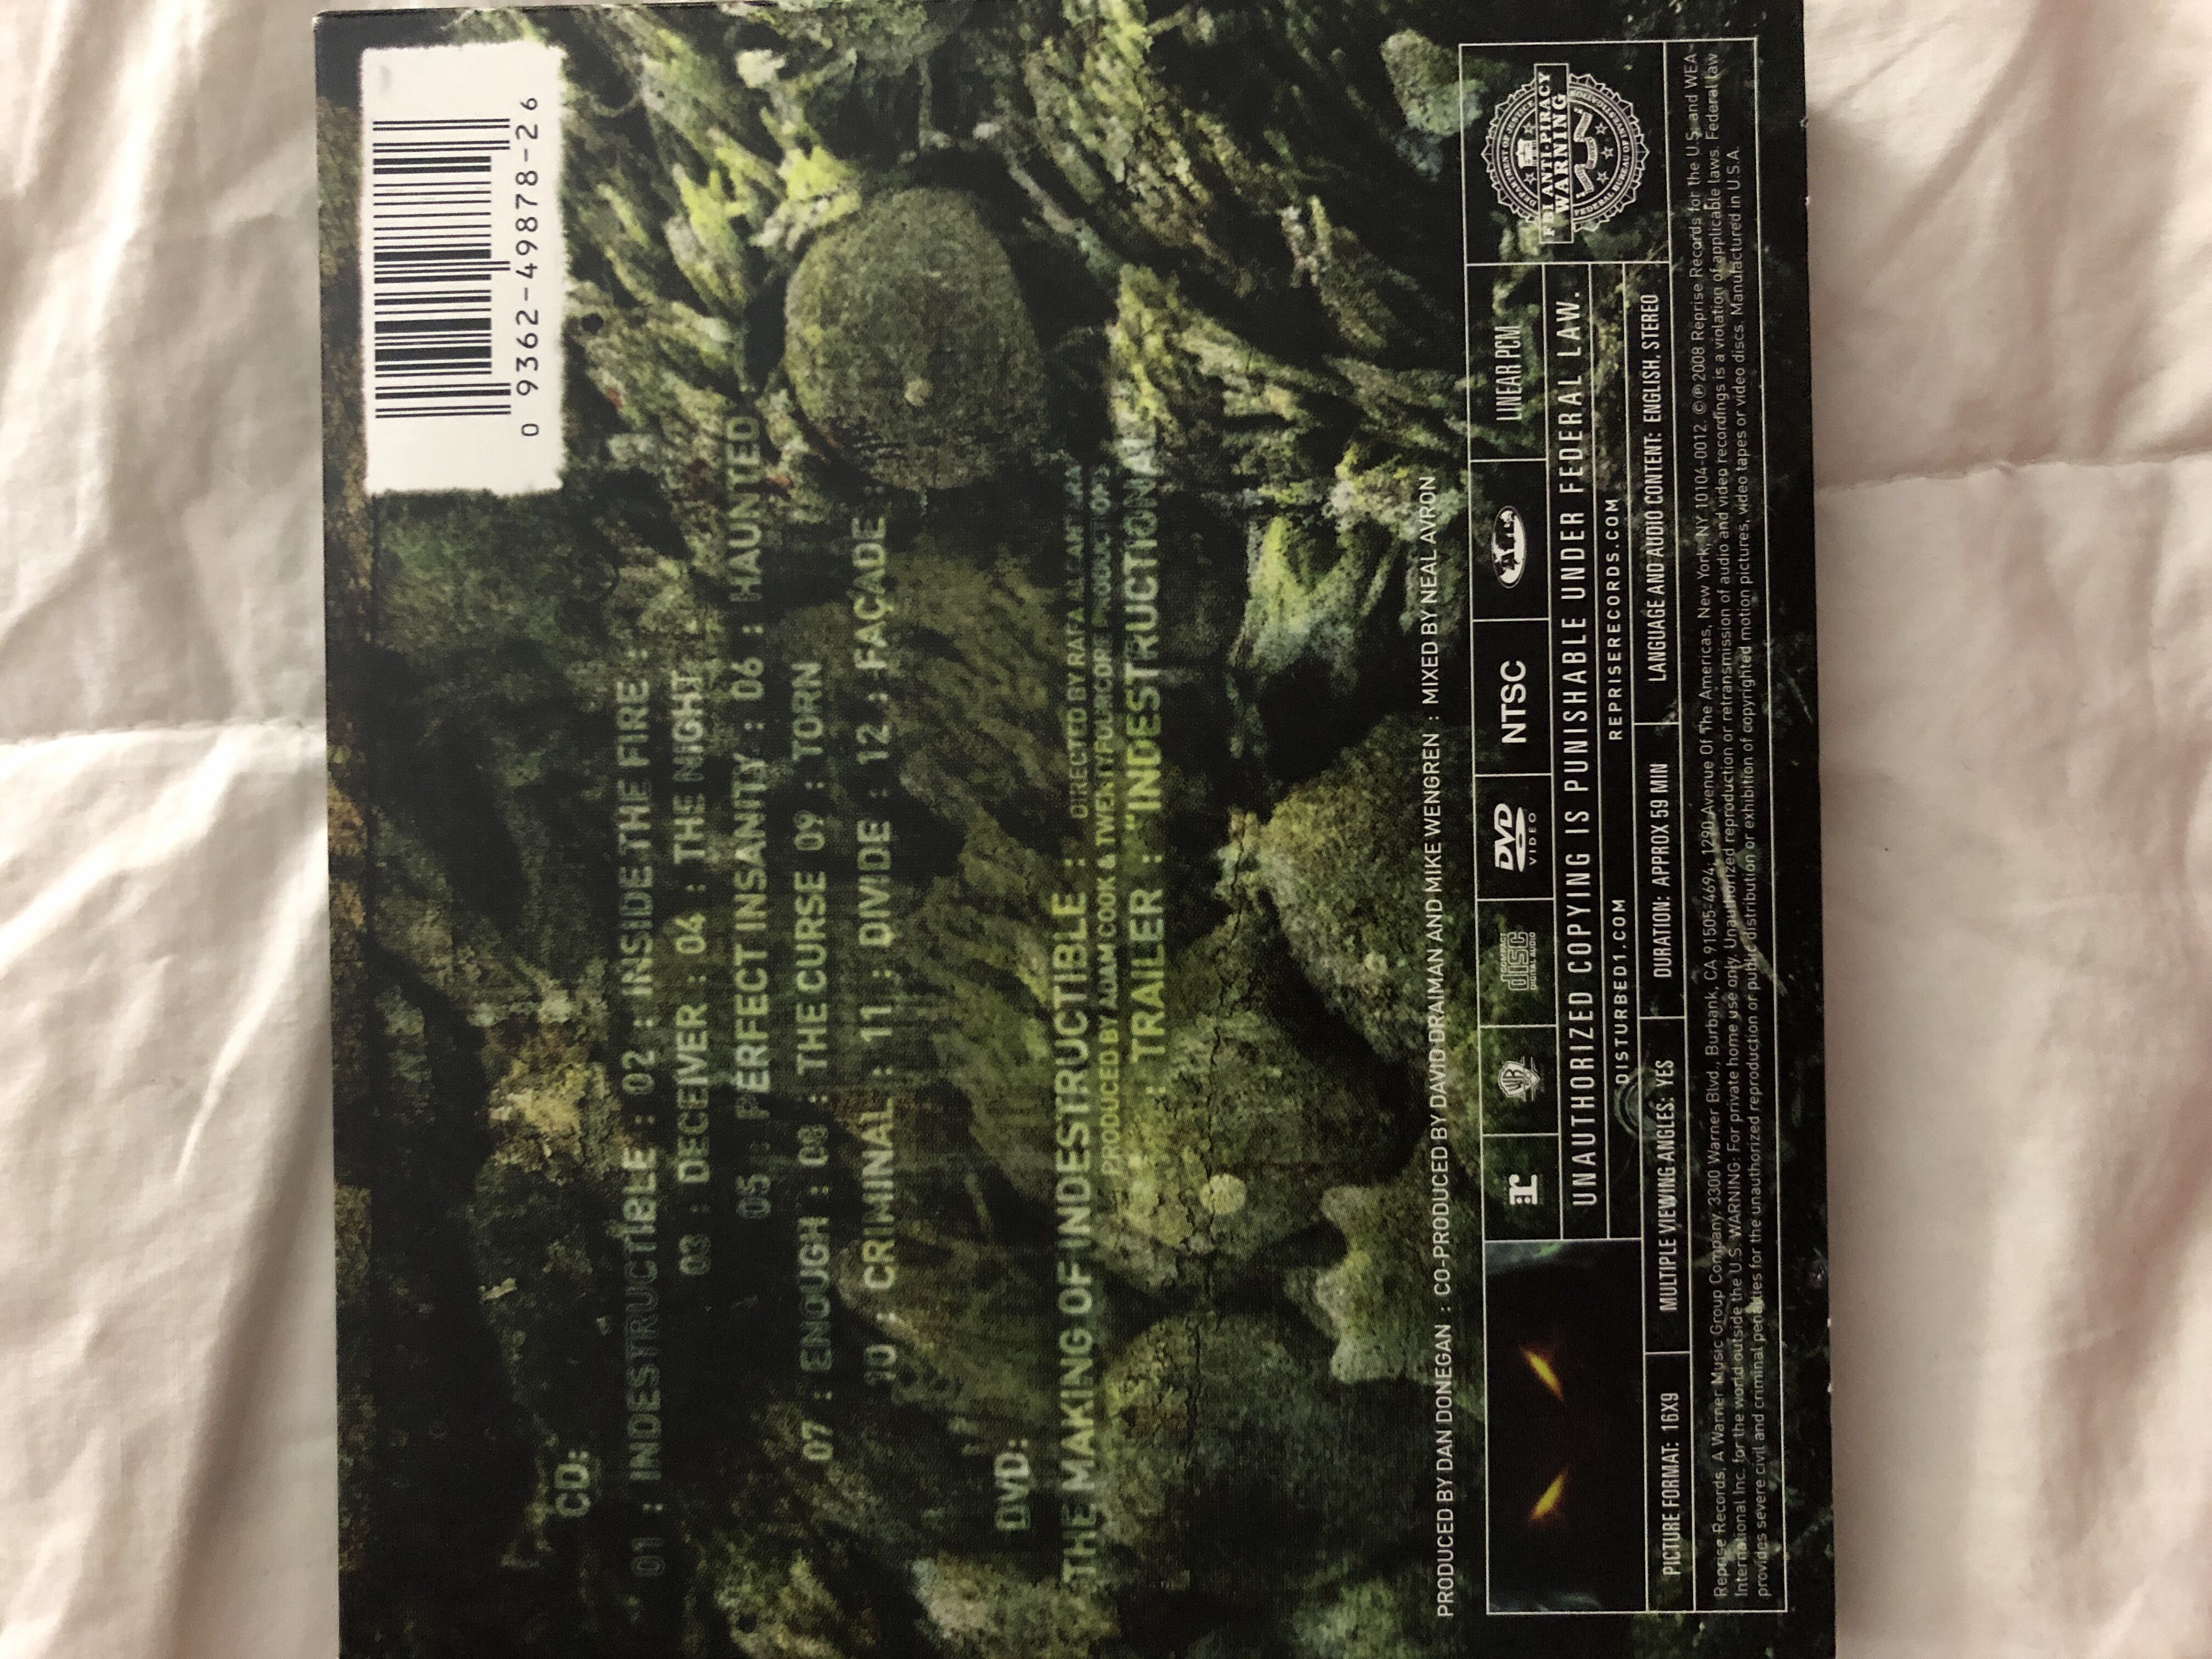 Indestructible - Disturbed (CD - 49) music collectible [Barcode 093624987826] - Main Image 2